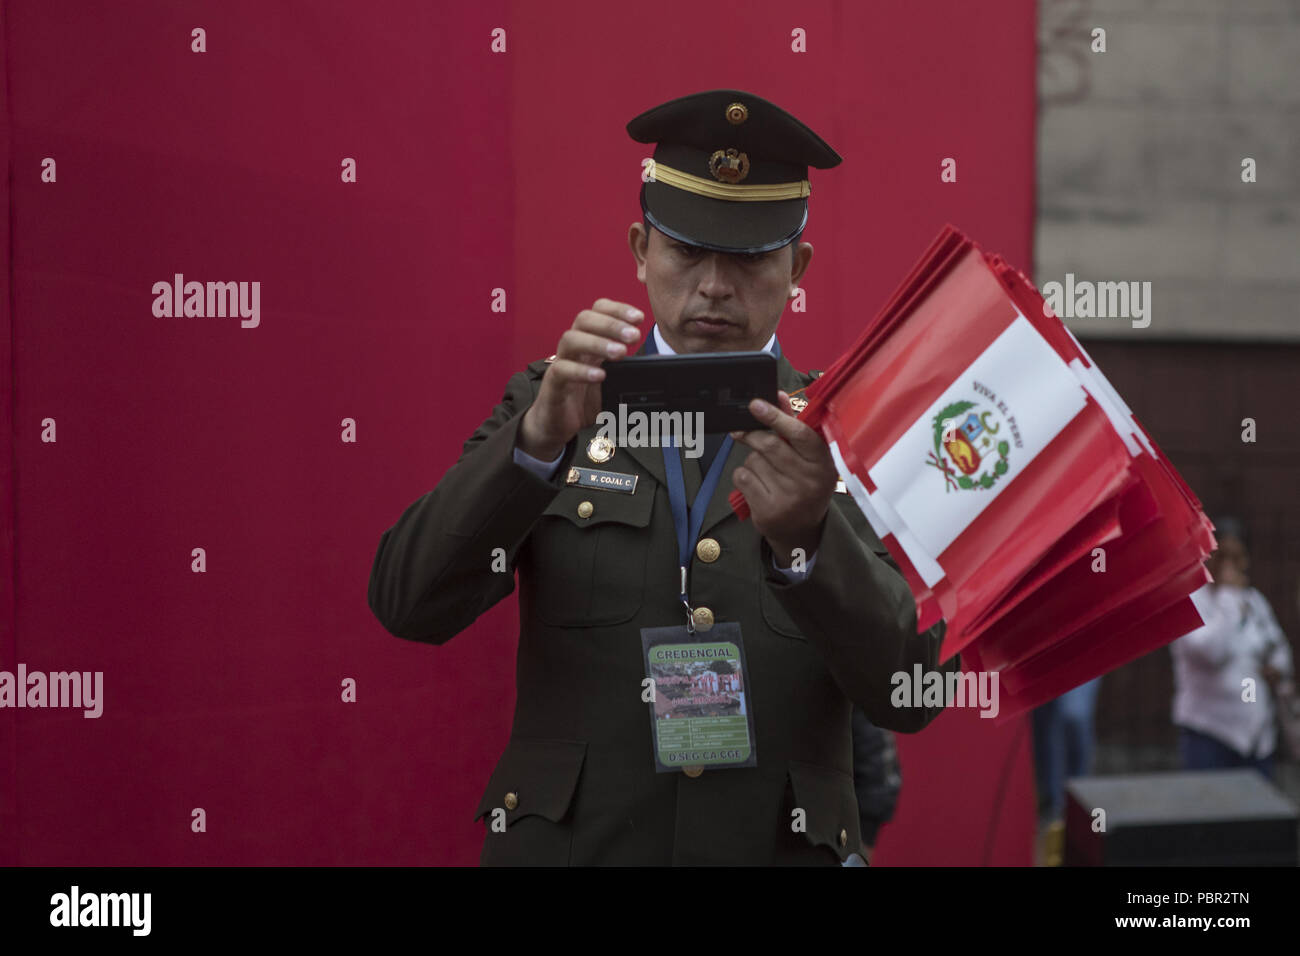 Lima, Lima, Peru. 29th July, 2018. A police officer seen taking pictures with his mobile phone.Members of Peru's armed forces, coastguard, search & rescue, and police march in full uniform during the country's Gran Parada Militar. This parade always occurs the day after Peru's Independence Day marking the official end of festivities across the nation. Credit: Guillermo Gutierrez/SOPA Images/ZUMA Wire/Alamy Live News Stock Photo